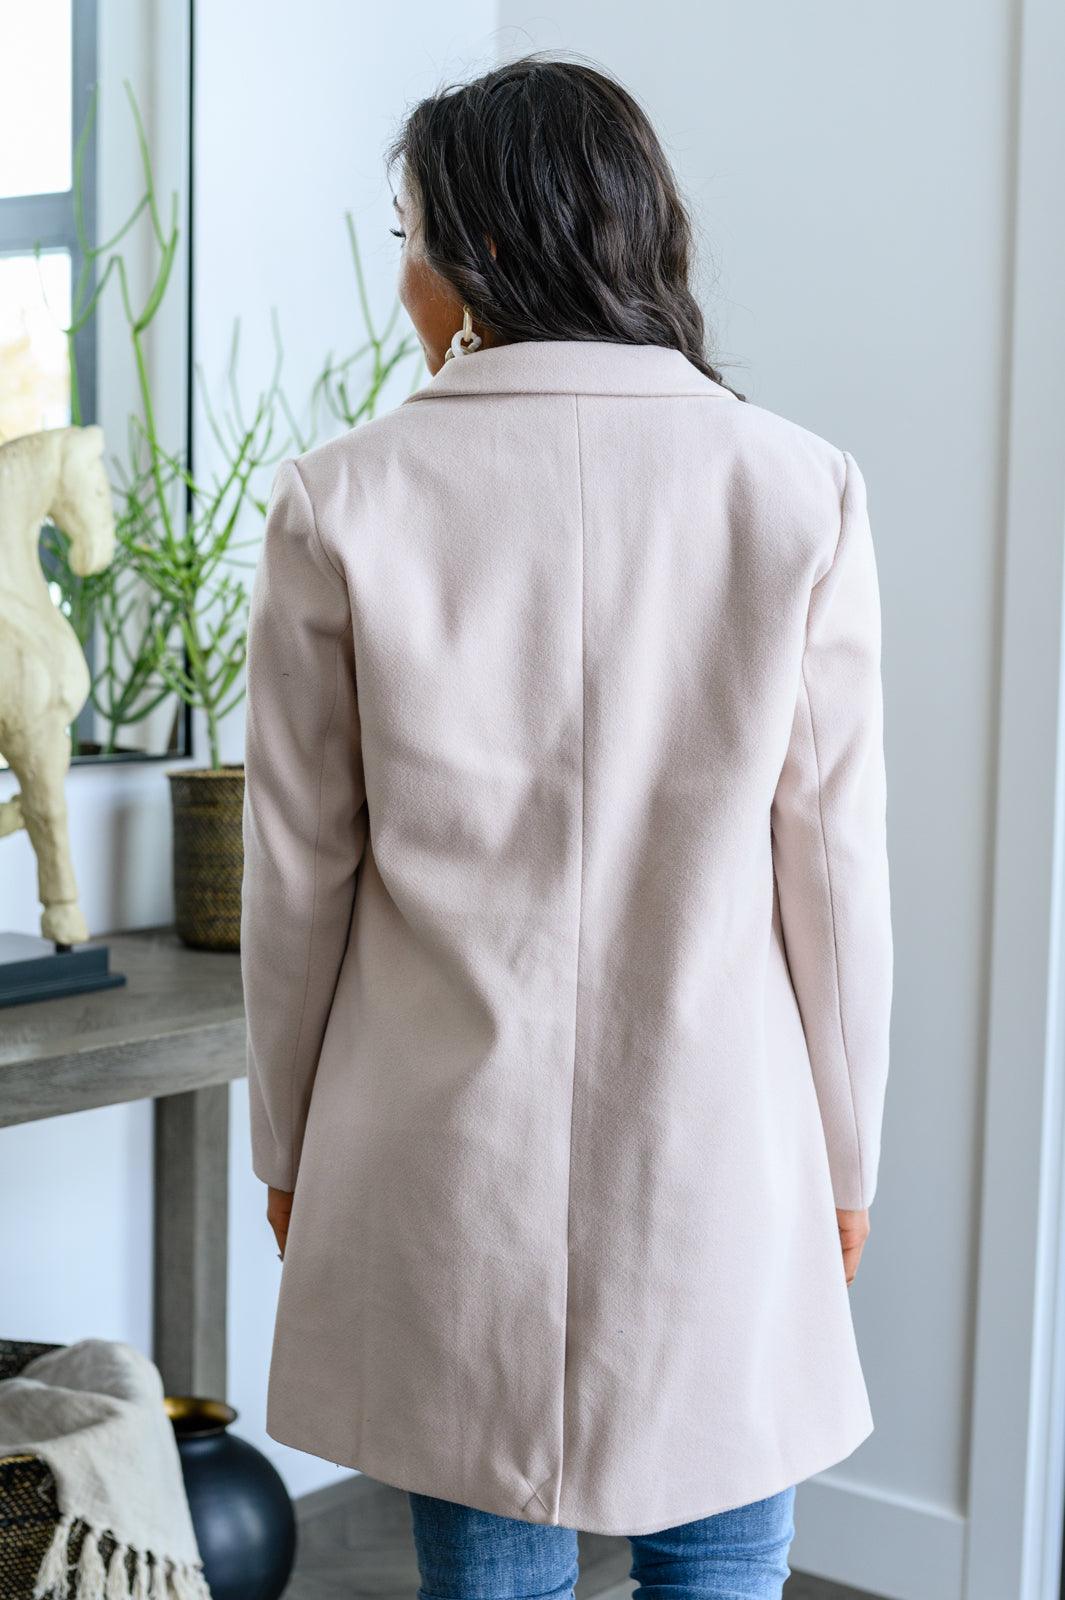 Can't Miss Out Jacket In Beige - The Fiery Jasmine